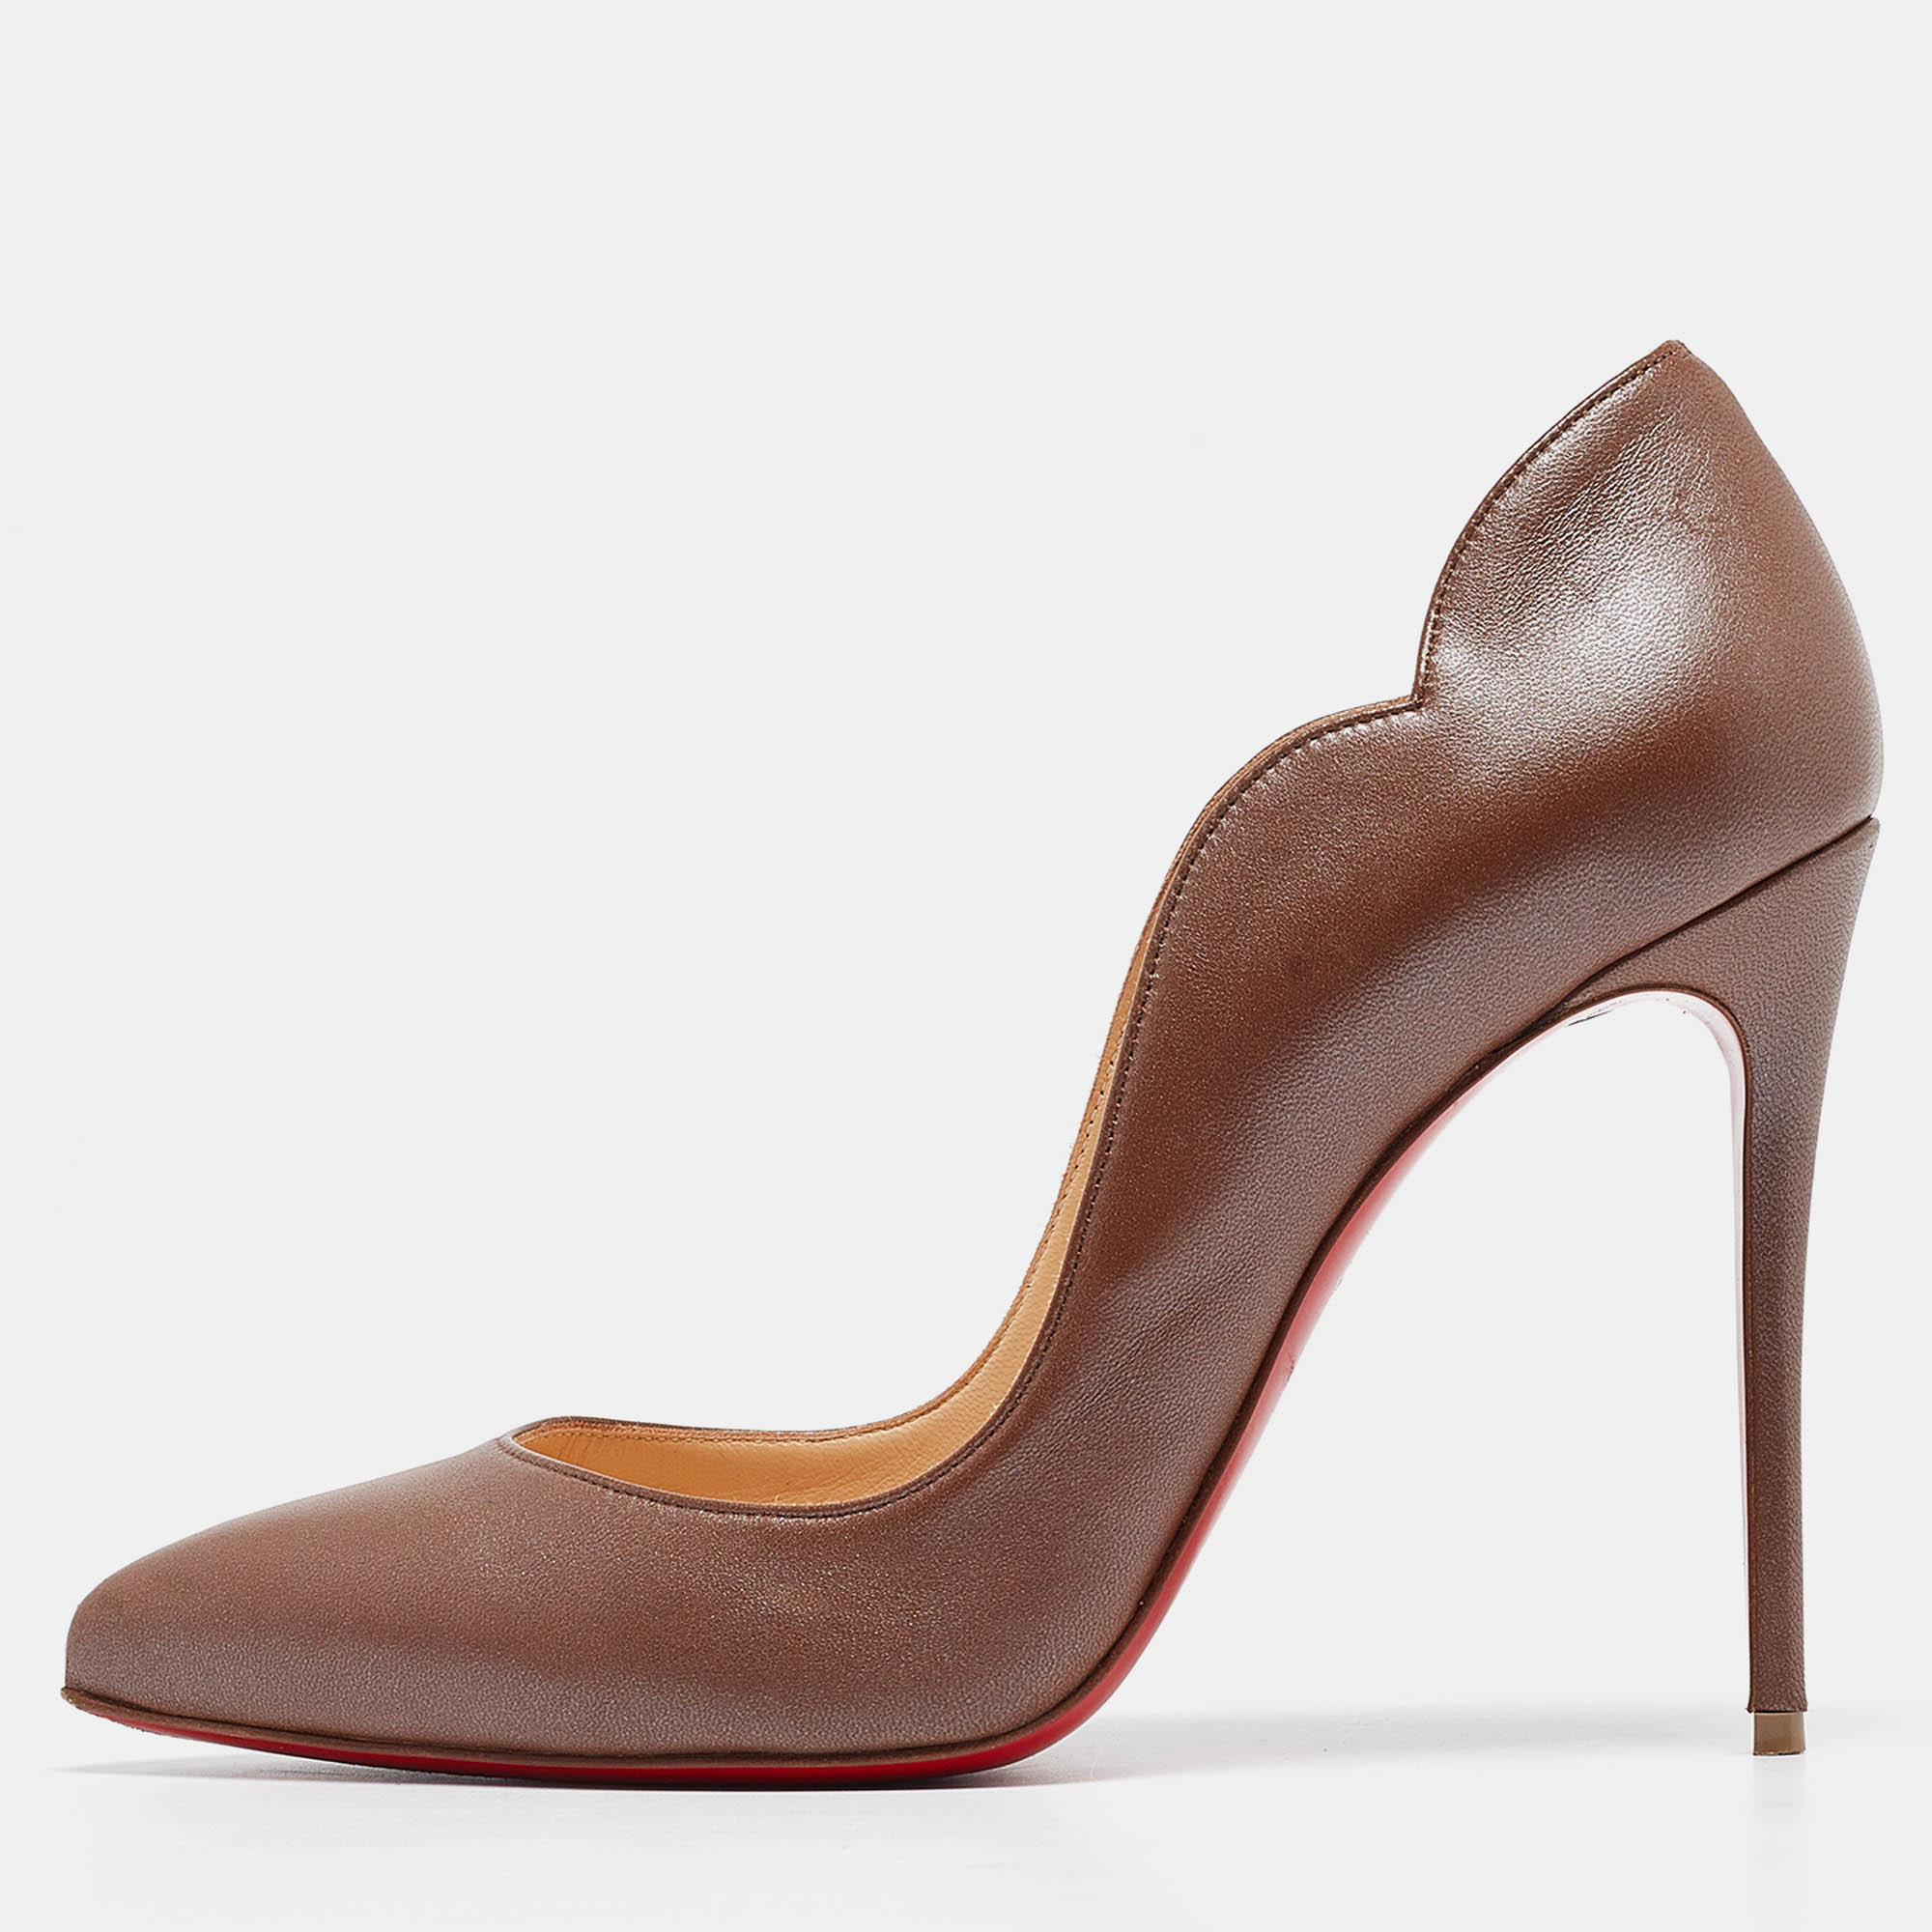 Christian louboutin metallic brown leather hot chick pumps size 39